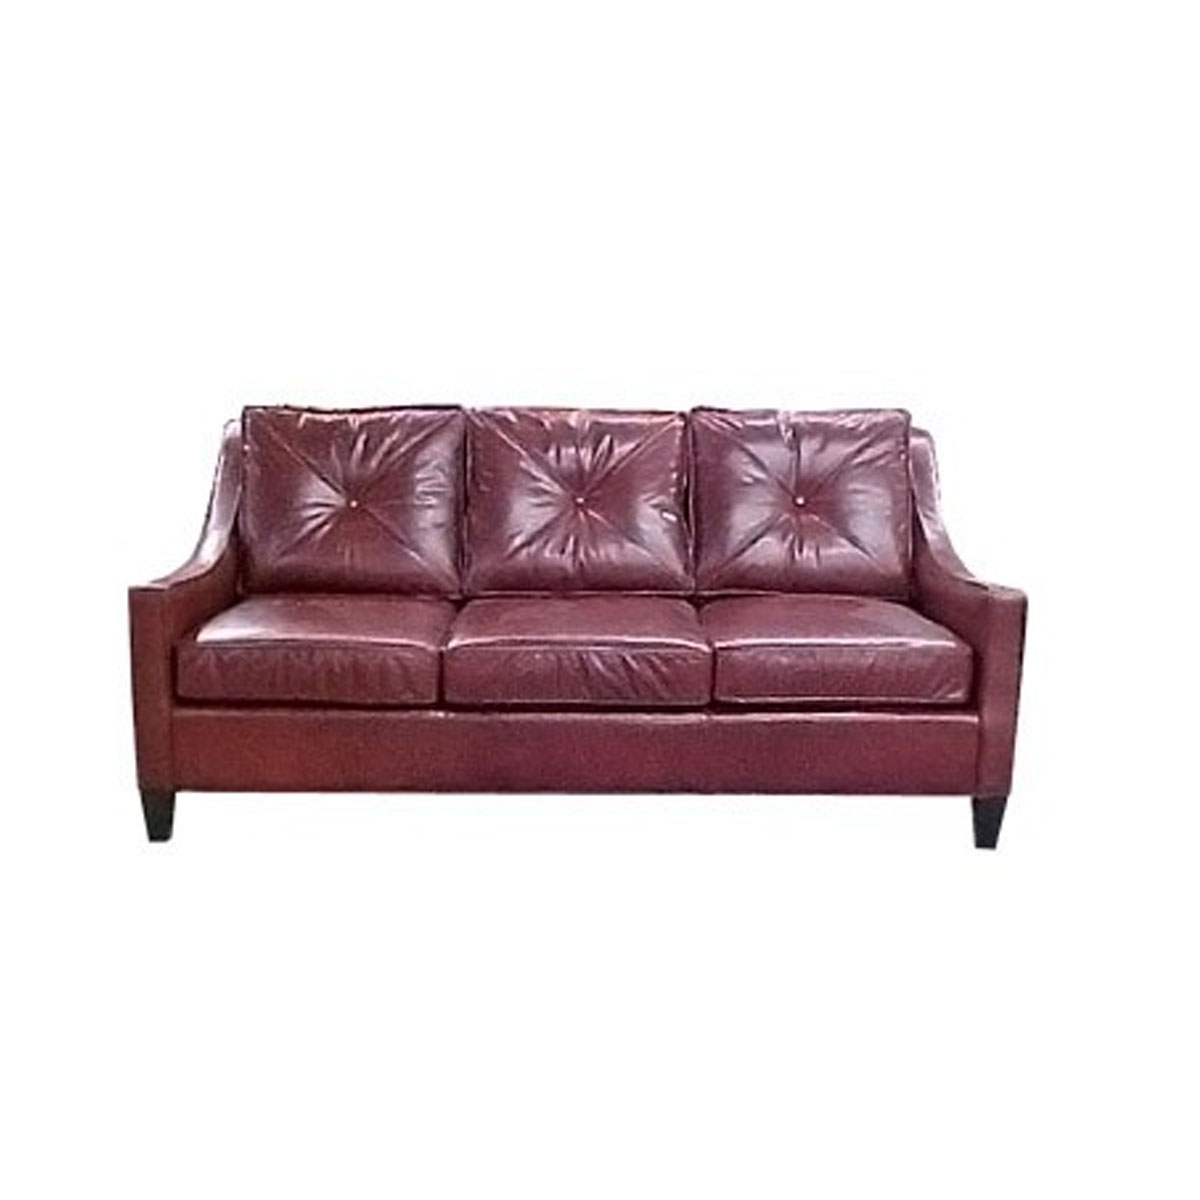 Gracey 2234 Sofa by McKinley Leather